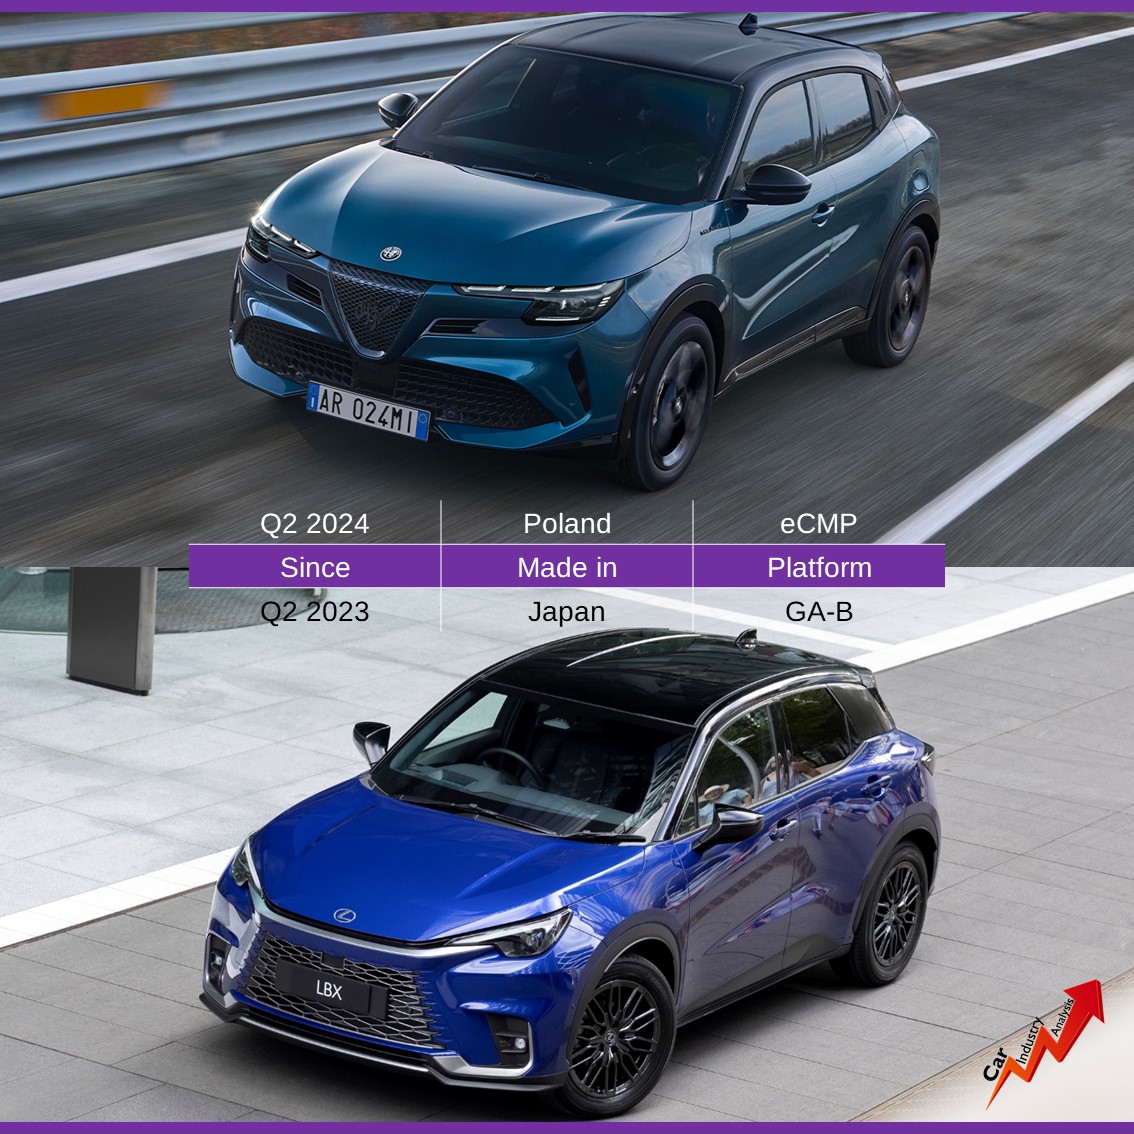 The new Alfa Romeo Junior has 3 direct rivals depending on its powertrain. The electric version will rival with the cousins Smart #1 and Volvo EX30, while the hybrid one is a direct competitor of the Lexus LBX. What model do you prefer? #carindustryanalysis #felipemunoz